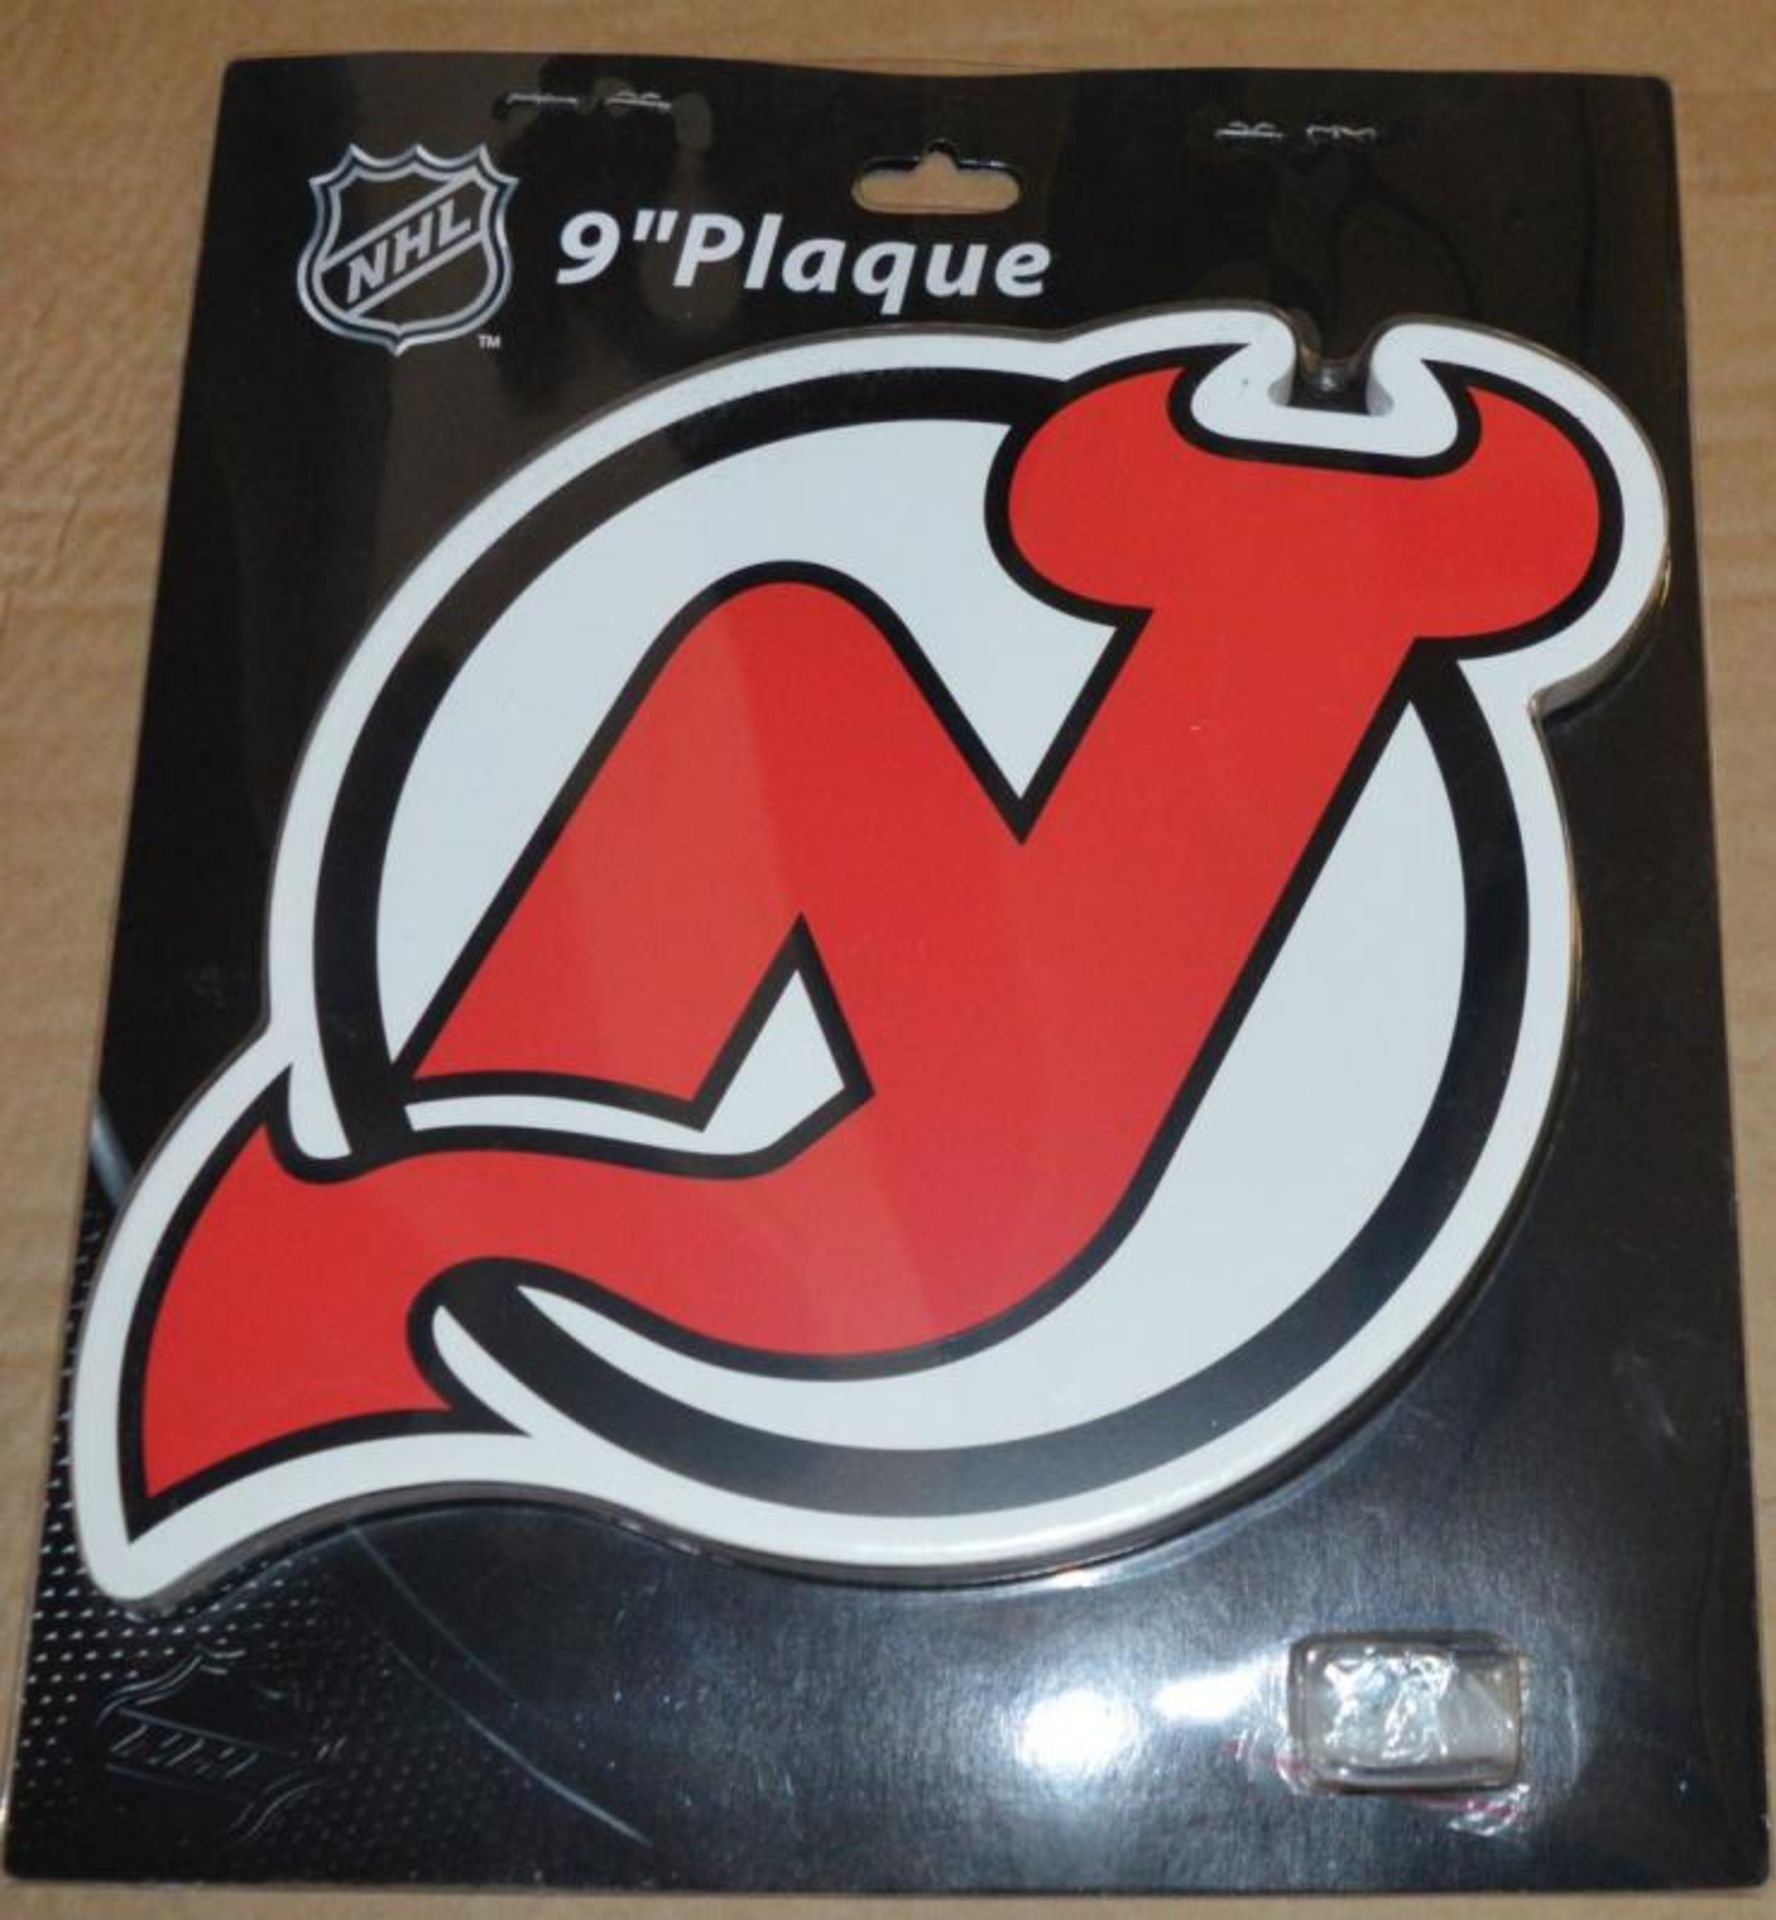 12 x 9"NHL Hockey New Jersey Devils Plaques - New/Boxed - CL185 - Ref: DRT0754 - Location: Stoke-on - Image 9 of 9